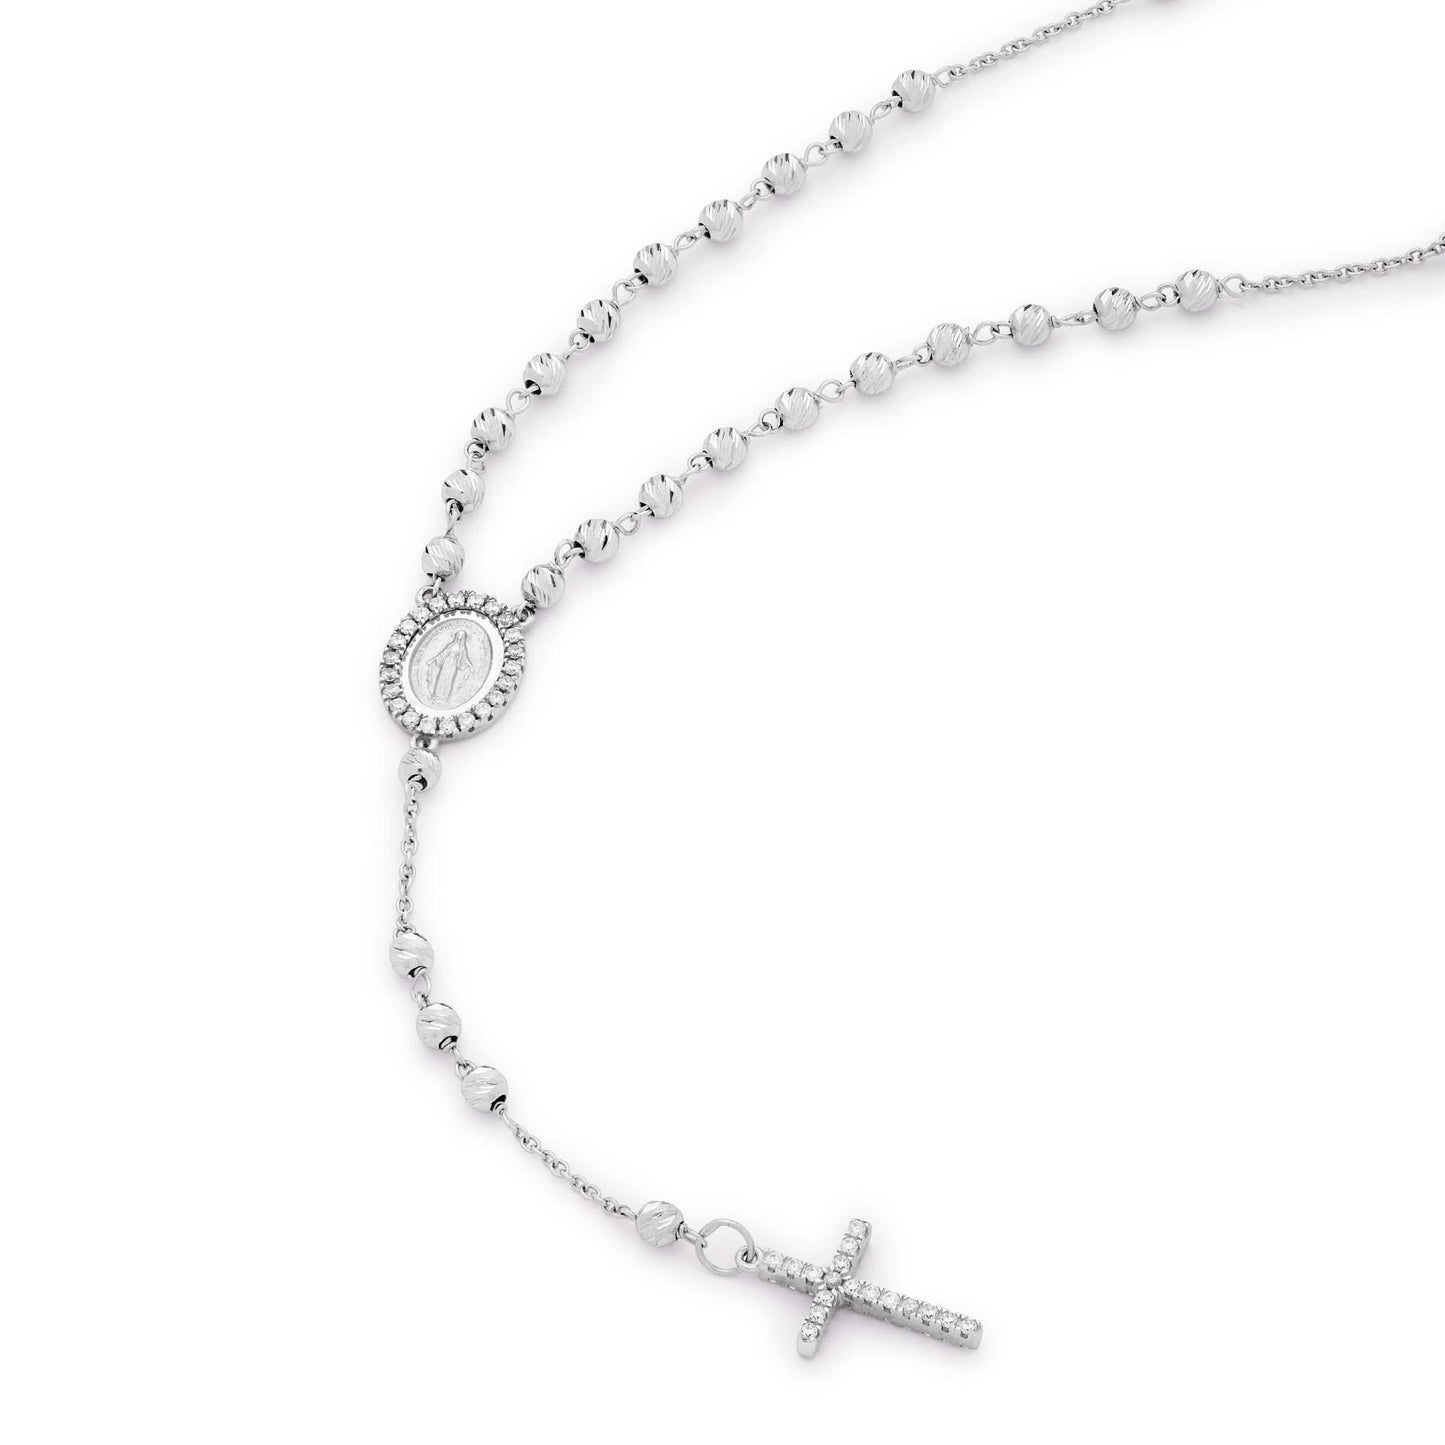 MONDO CATTOLICO Prayer Beads 22.5 cm (8.85 in) / 2.7 mm (0.10 in) White Gold Faceted Beads Rosary